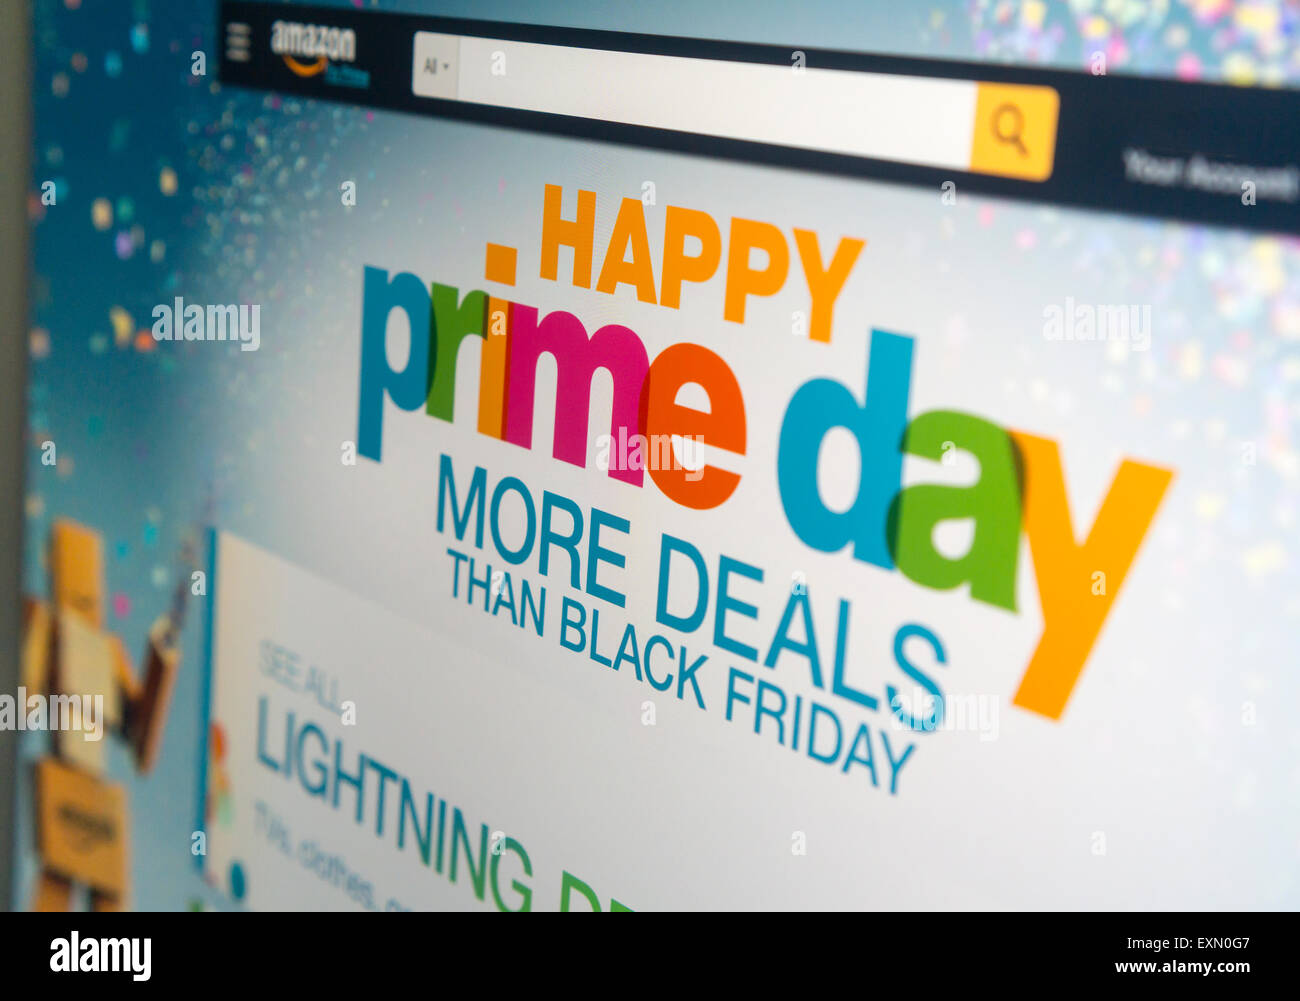 The Amazon website promotes their self-proclaimed 'Prime Day' on Wednesday, July 15, 2015. Bargains and deals galore are offered to Amazon Prime shoppers on this one-day event. The so-called holiday celebrates Amazon's 20th year in business and attempts to draw in customers as June retail sales in the U.S. were weak. Walmart has competing sales on their website today.  (© Richard B. Levine) Stock Photo